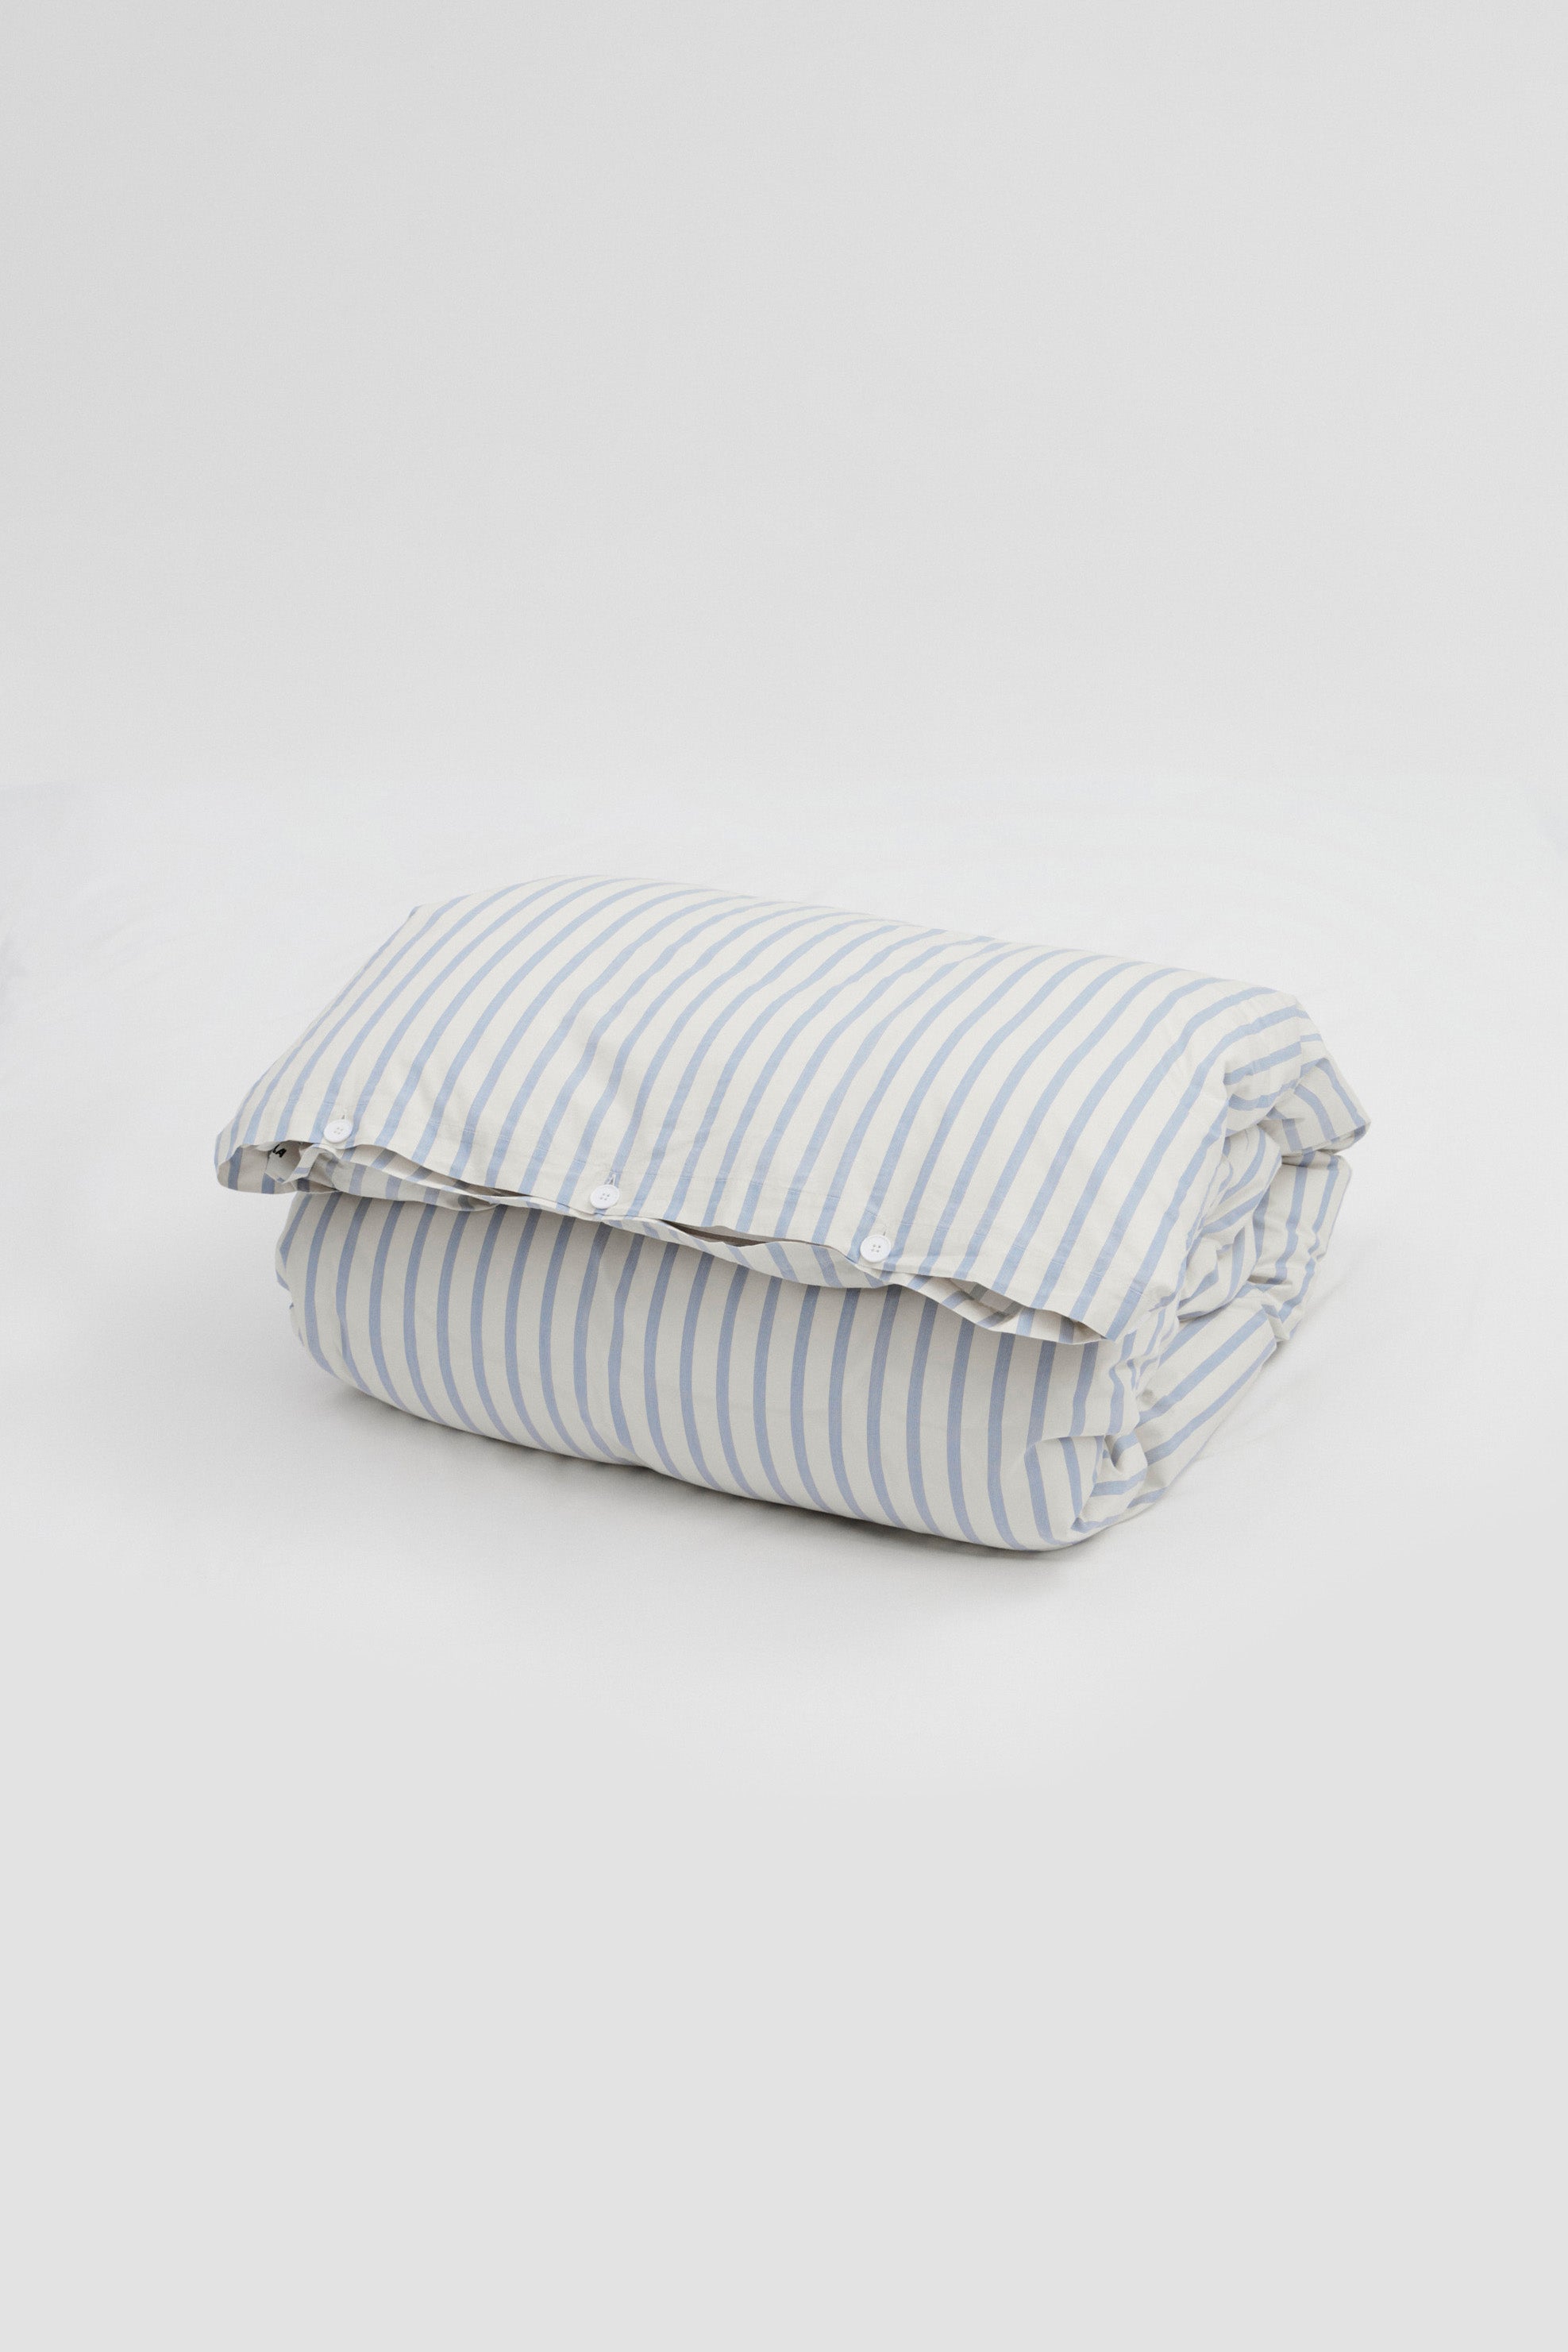 Percale King Duvet Cover Needle Stripes